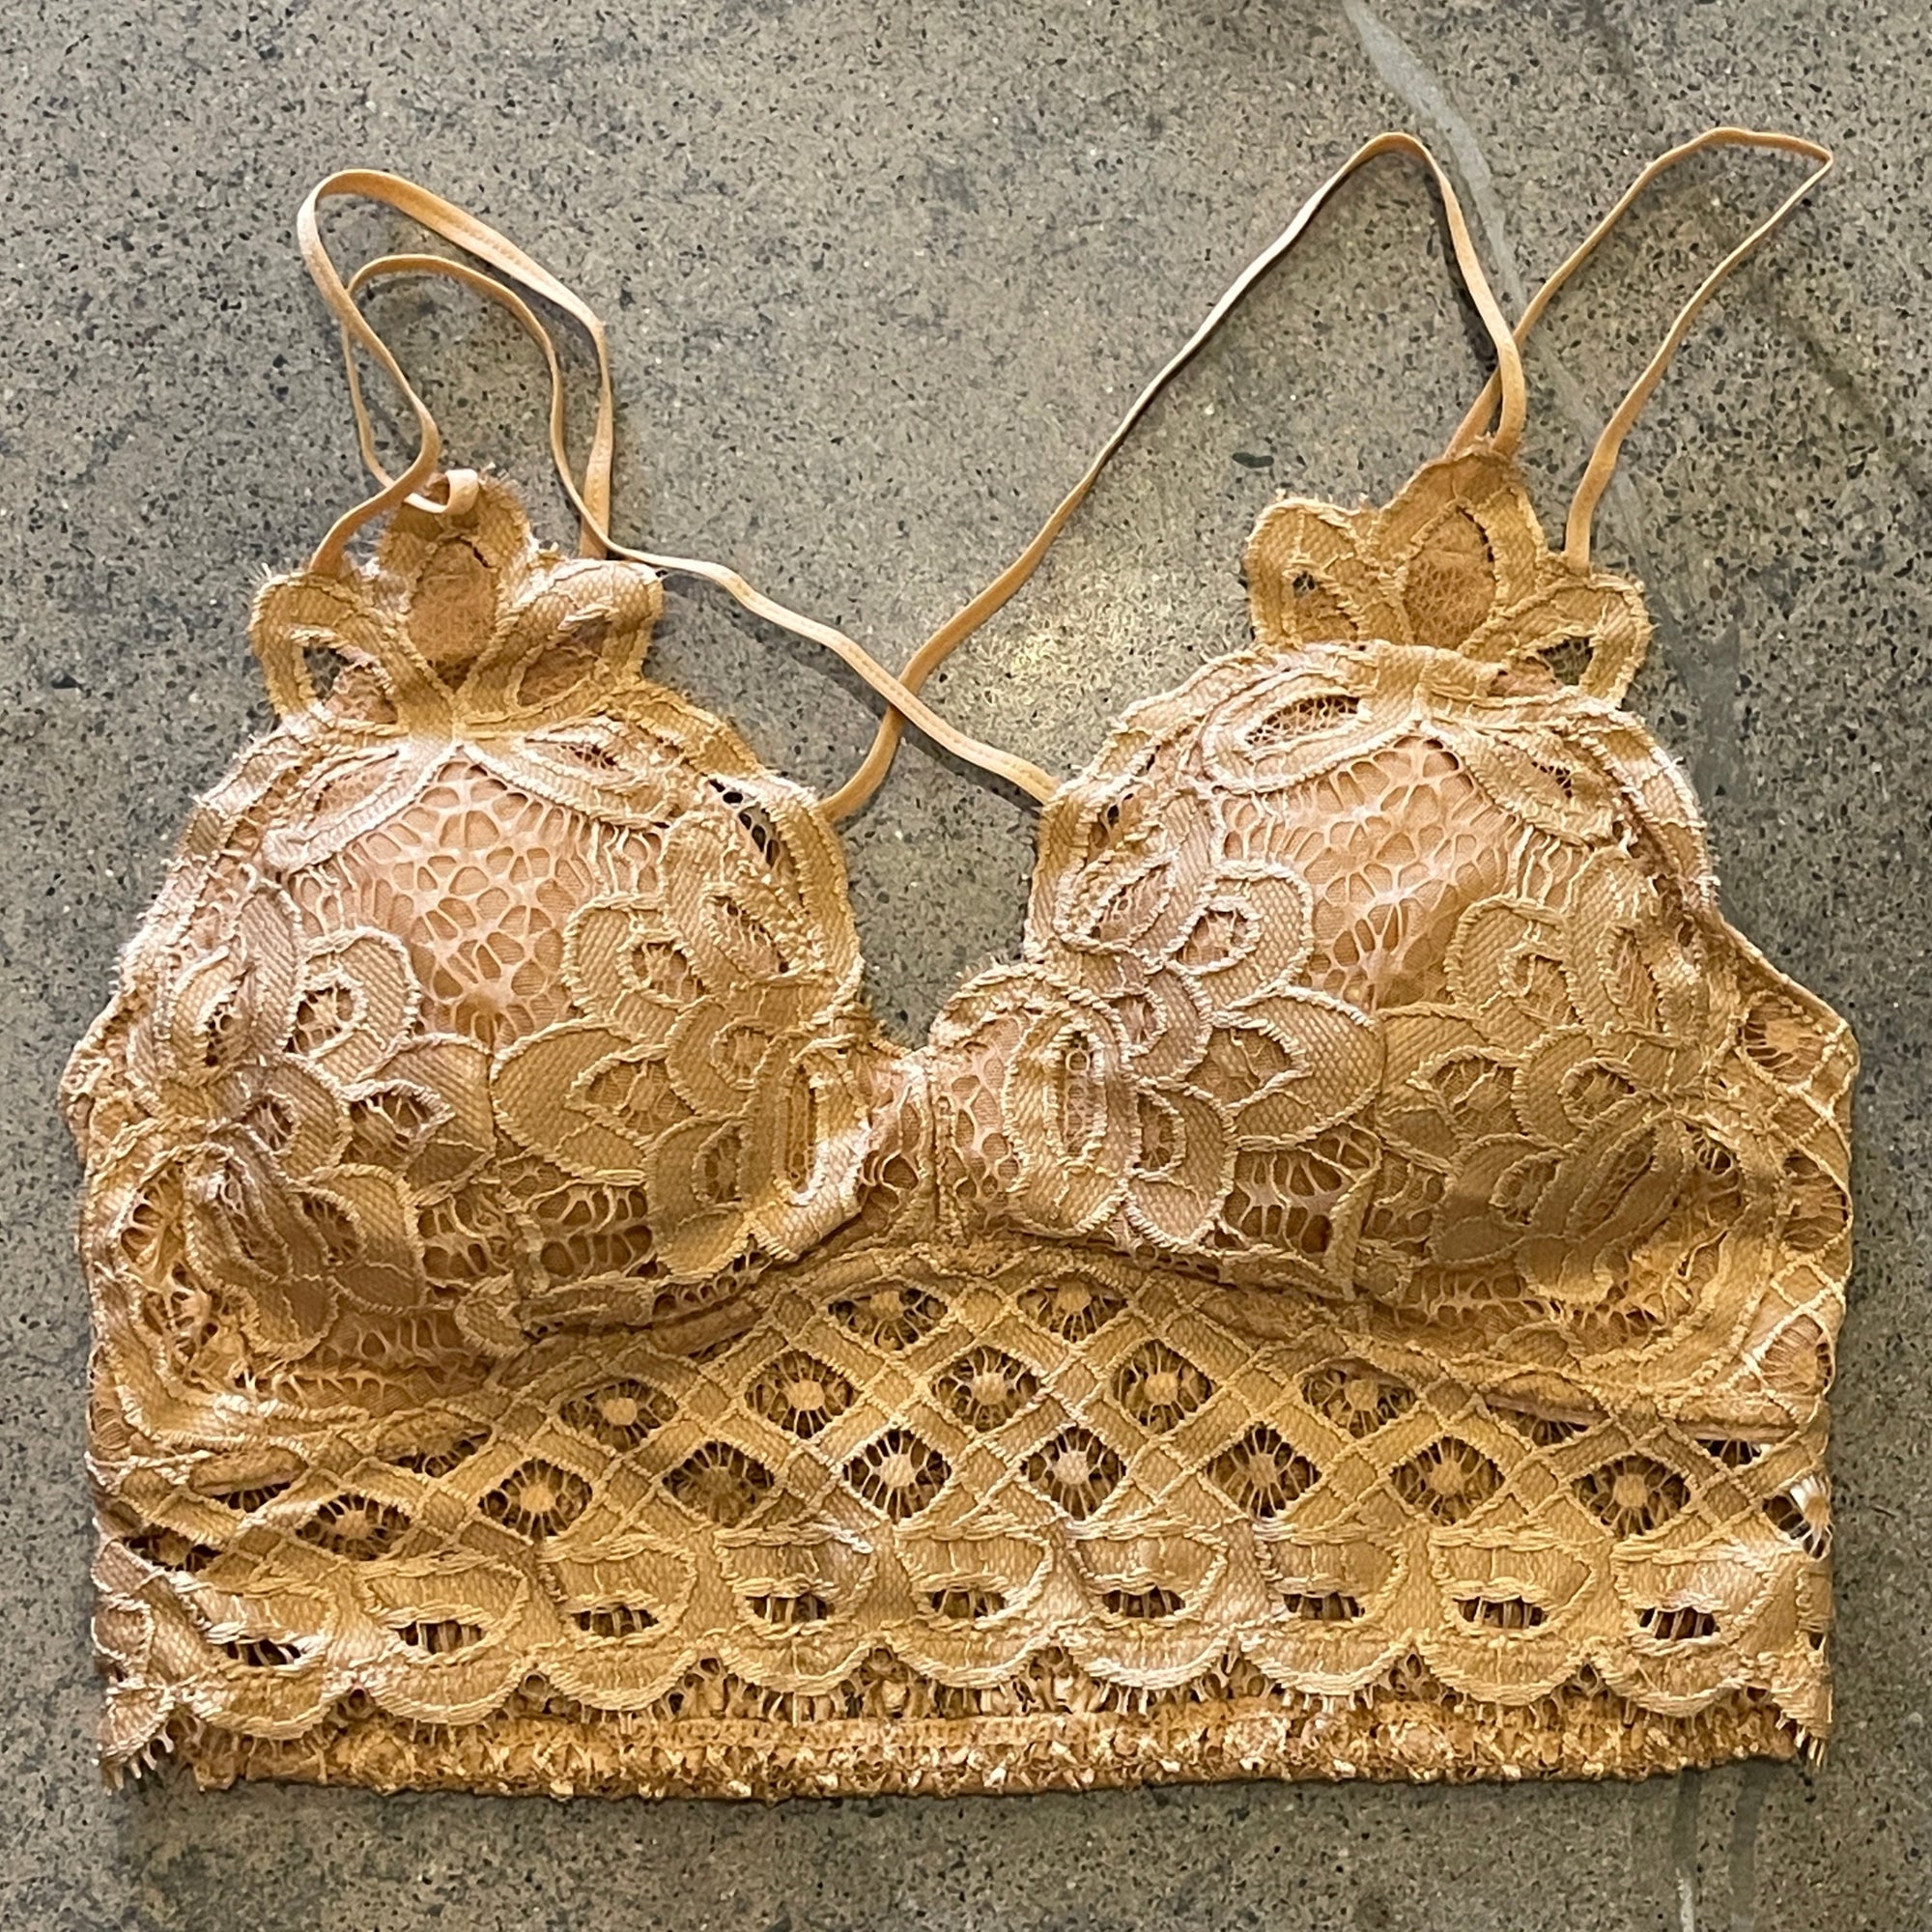 Lace Bralettes for the Free Spirited – Boho Beach Hut